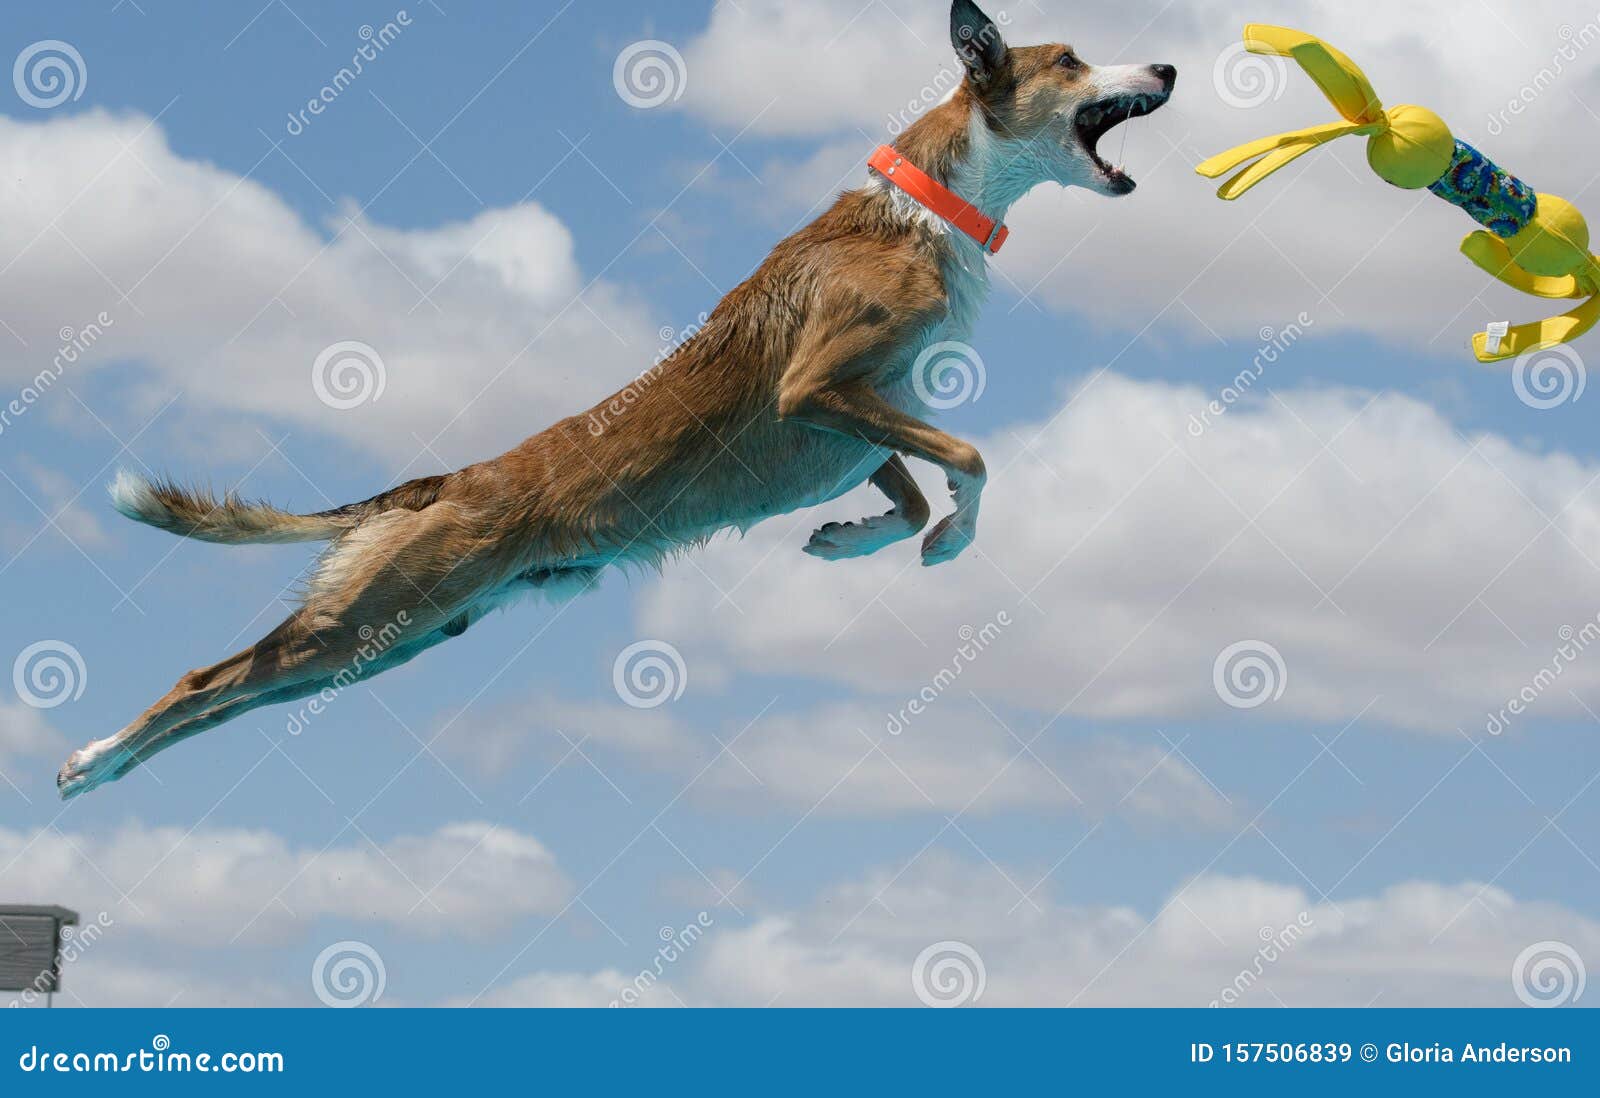 brown dog catching a yellow toy dock diving